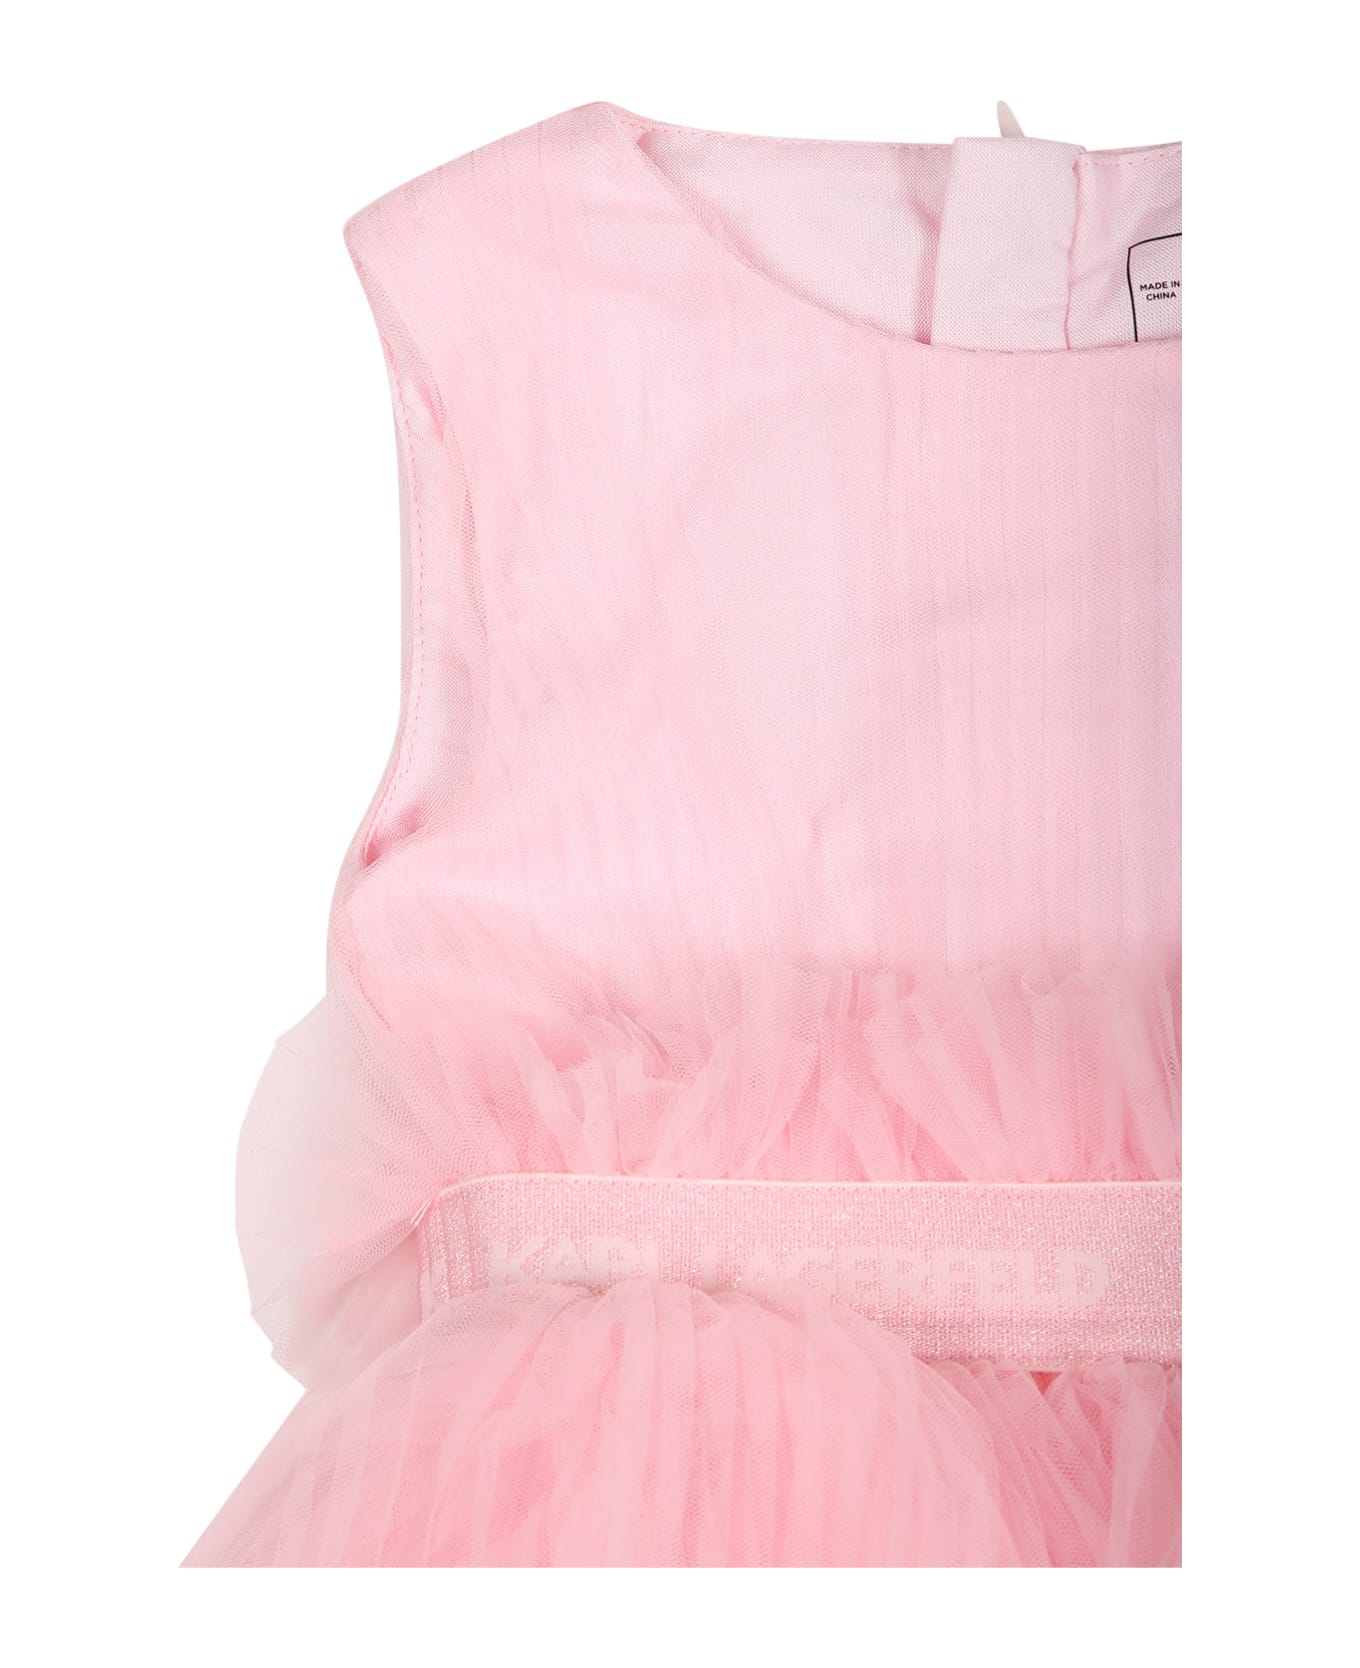 Karl Lagerfeld Kids Pink Dress For Baby Girl With Logo - Pink ウェア